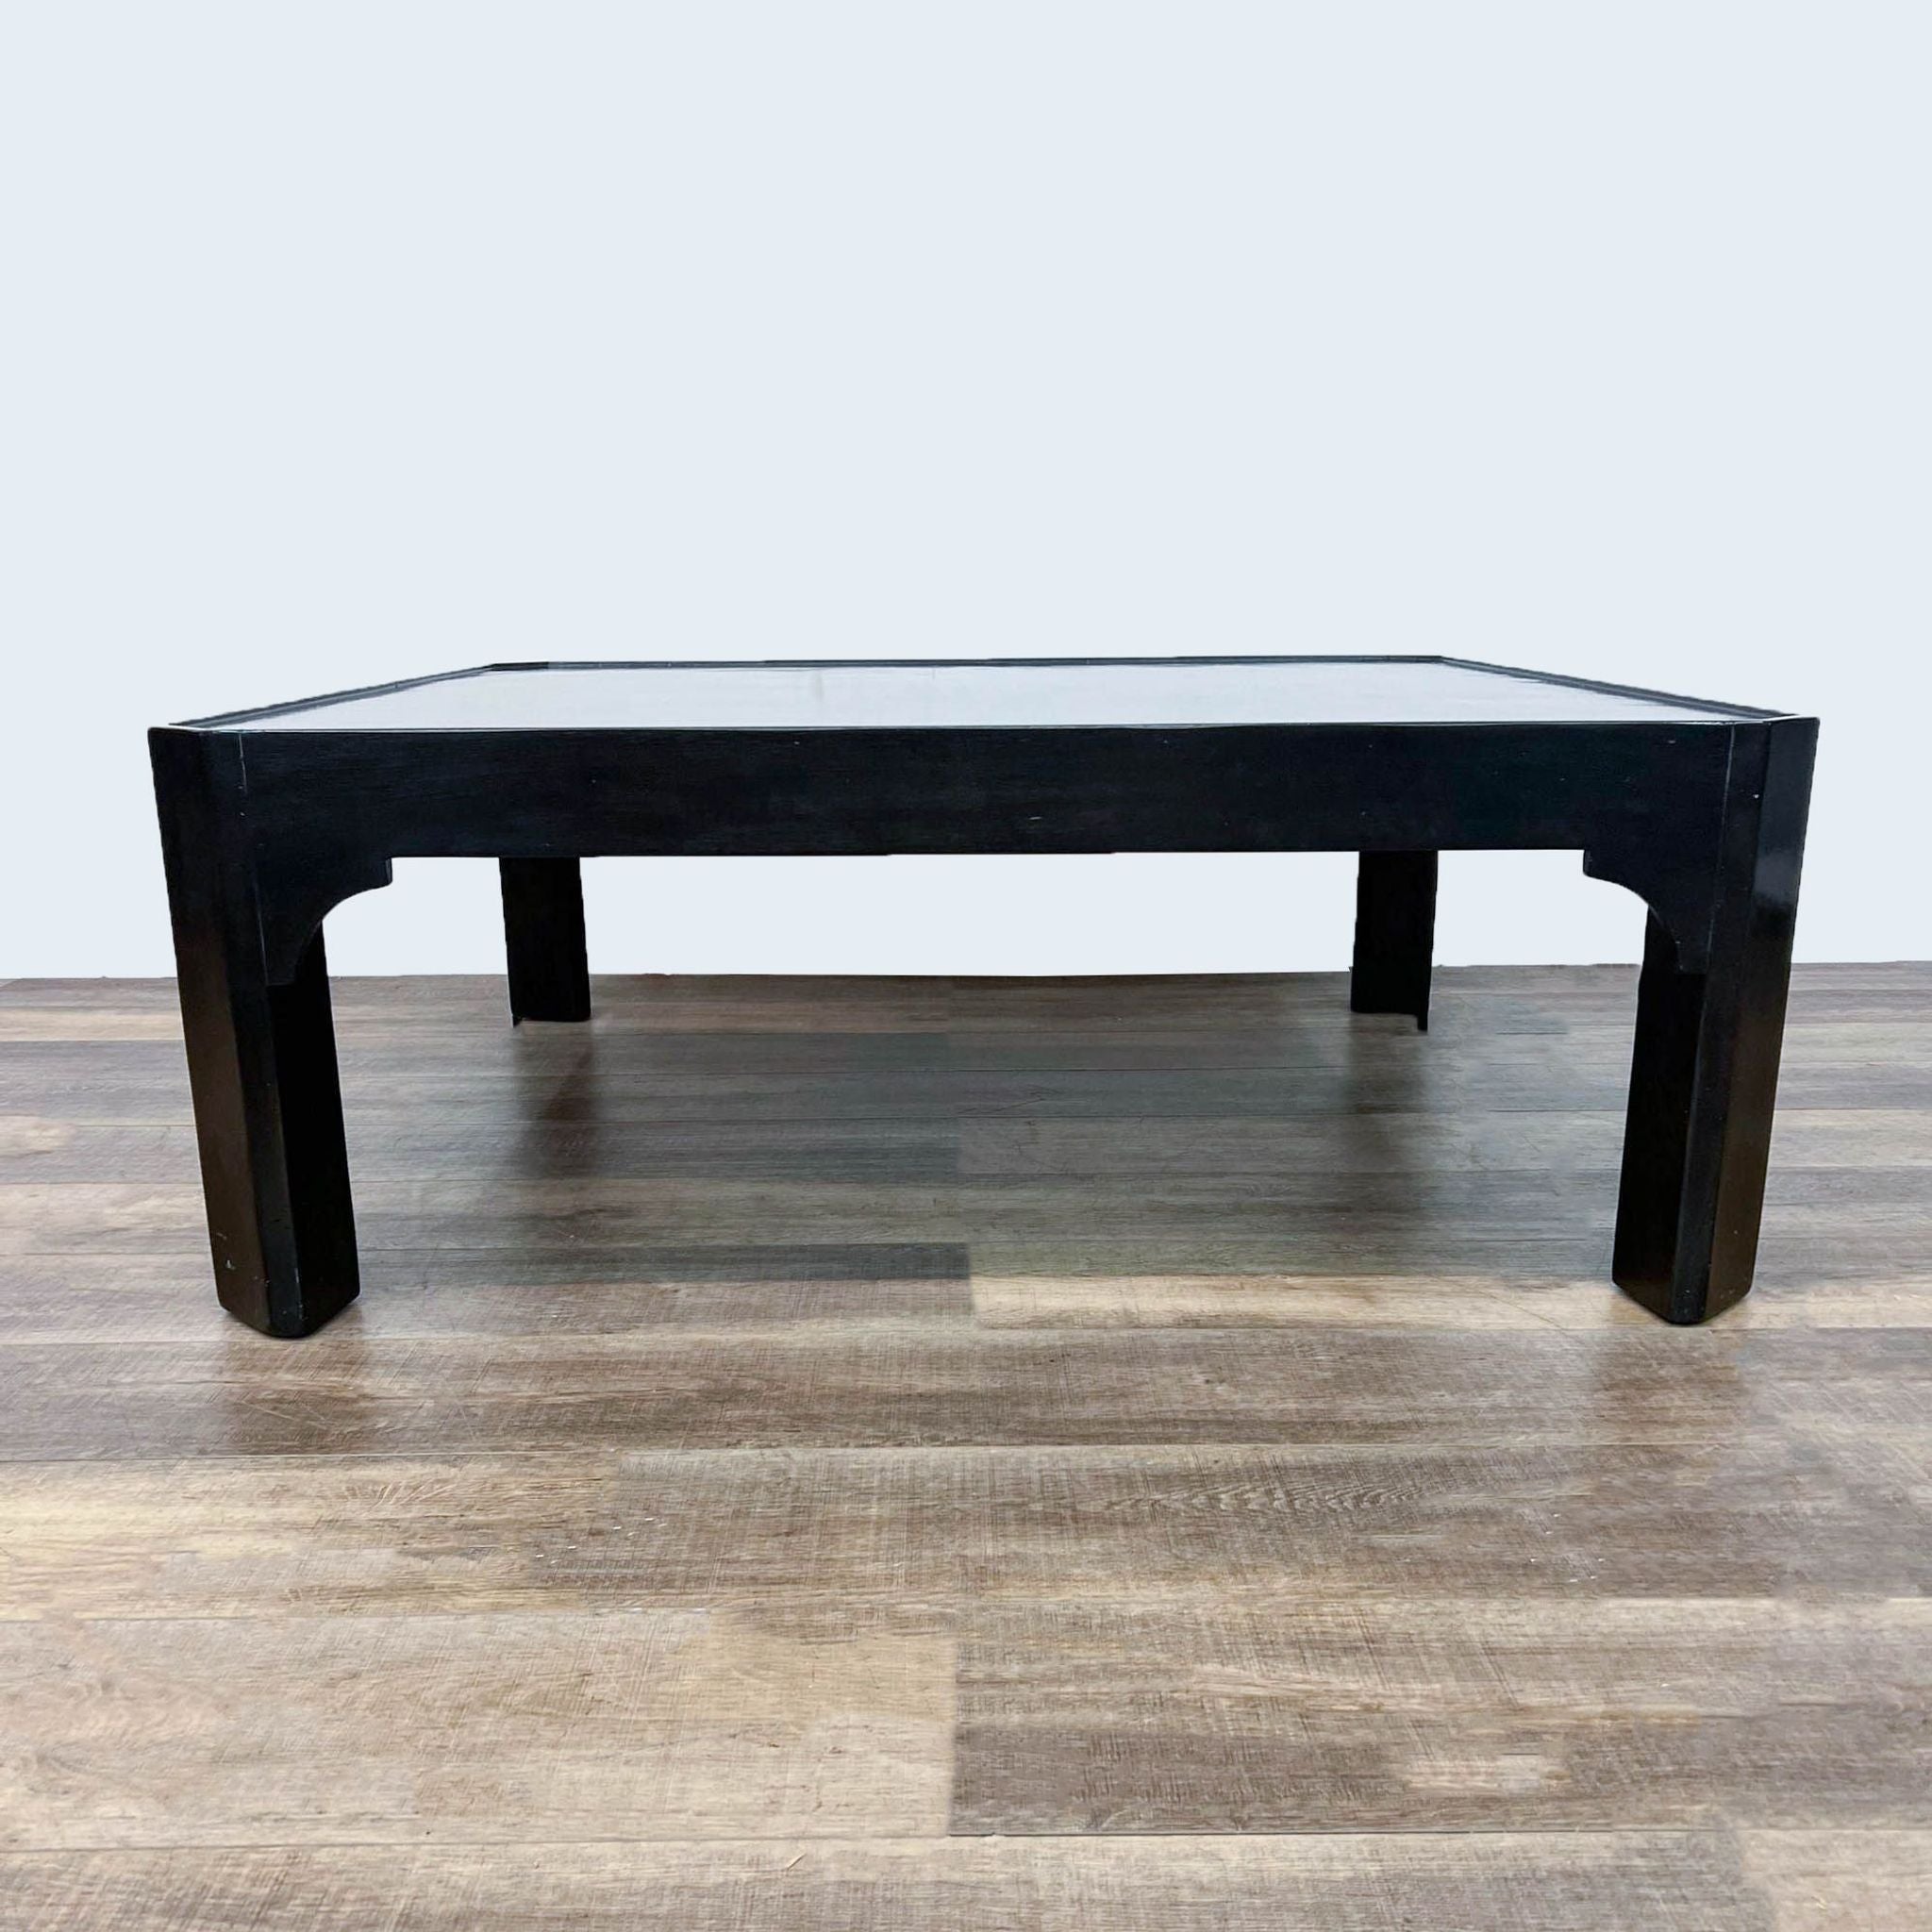 Black Dennis & Leen coffee table with straight legs and square top on a wooden floor.